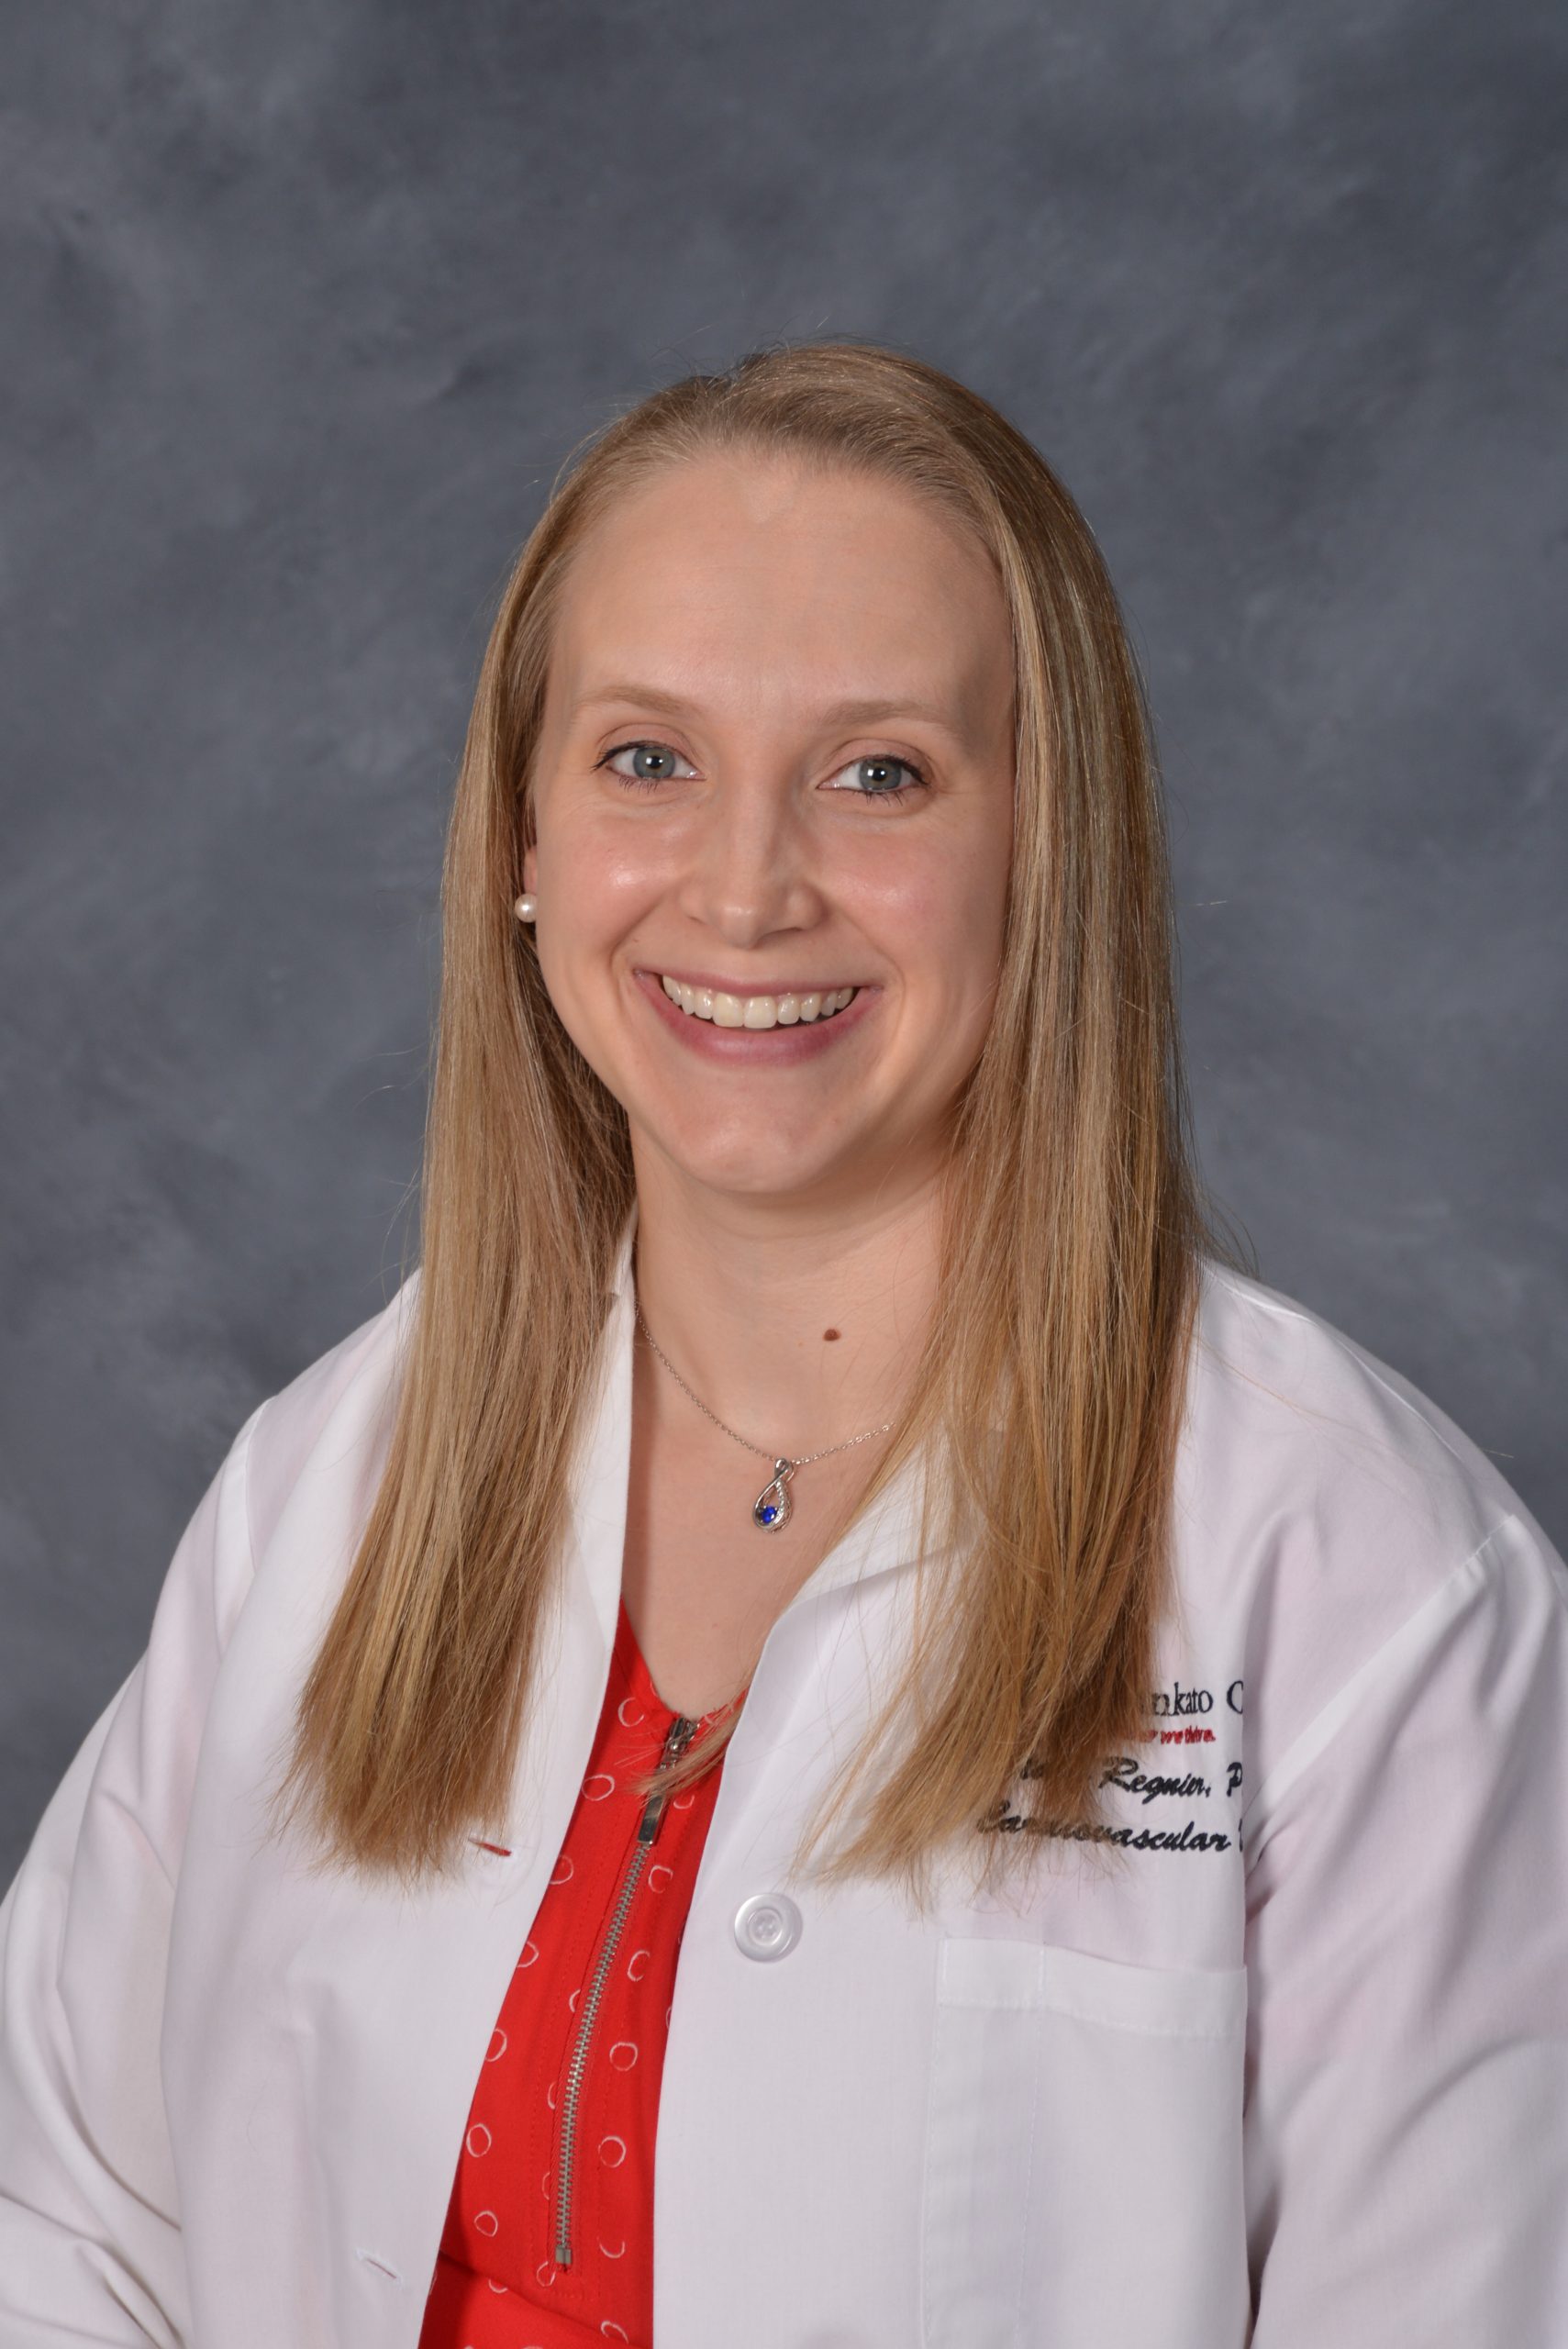 Stacy Regnier - Cardiovascular Medicine (Heart Care) provider at Main Street Clinic